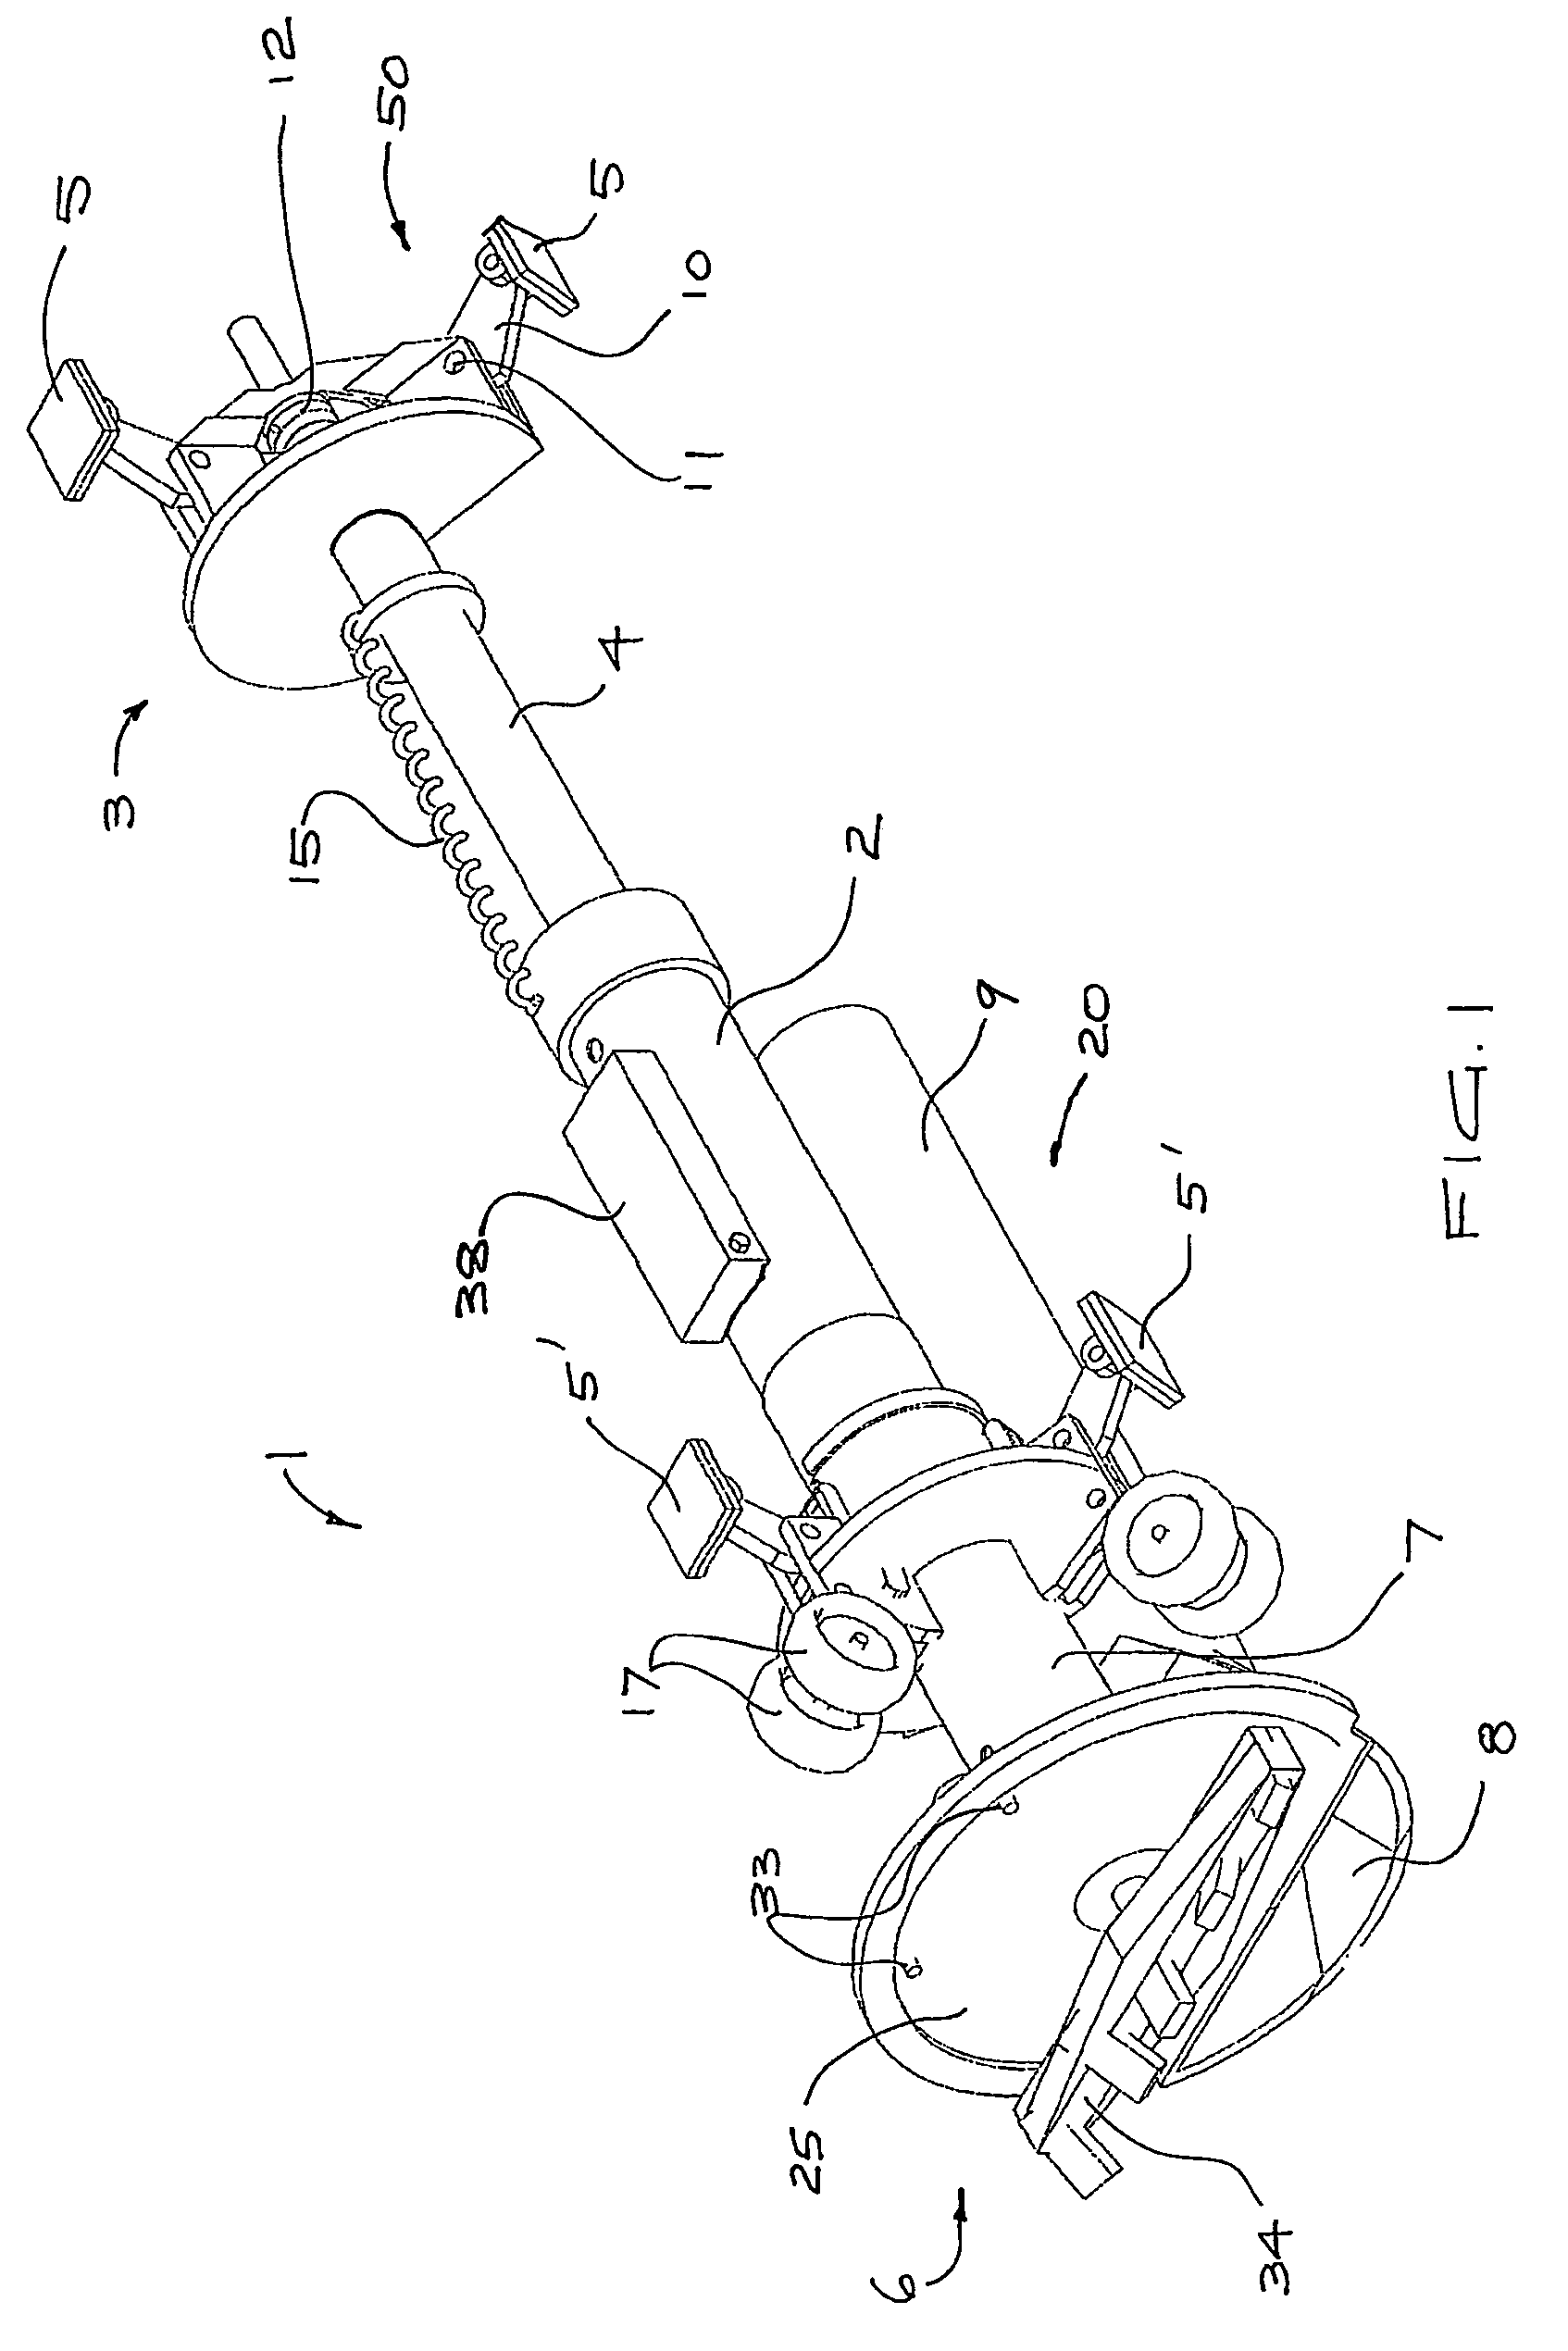 Self-propelled vehicle for use in a conduit